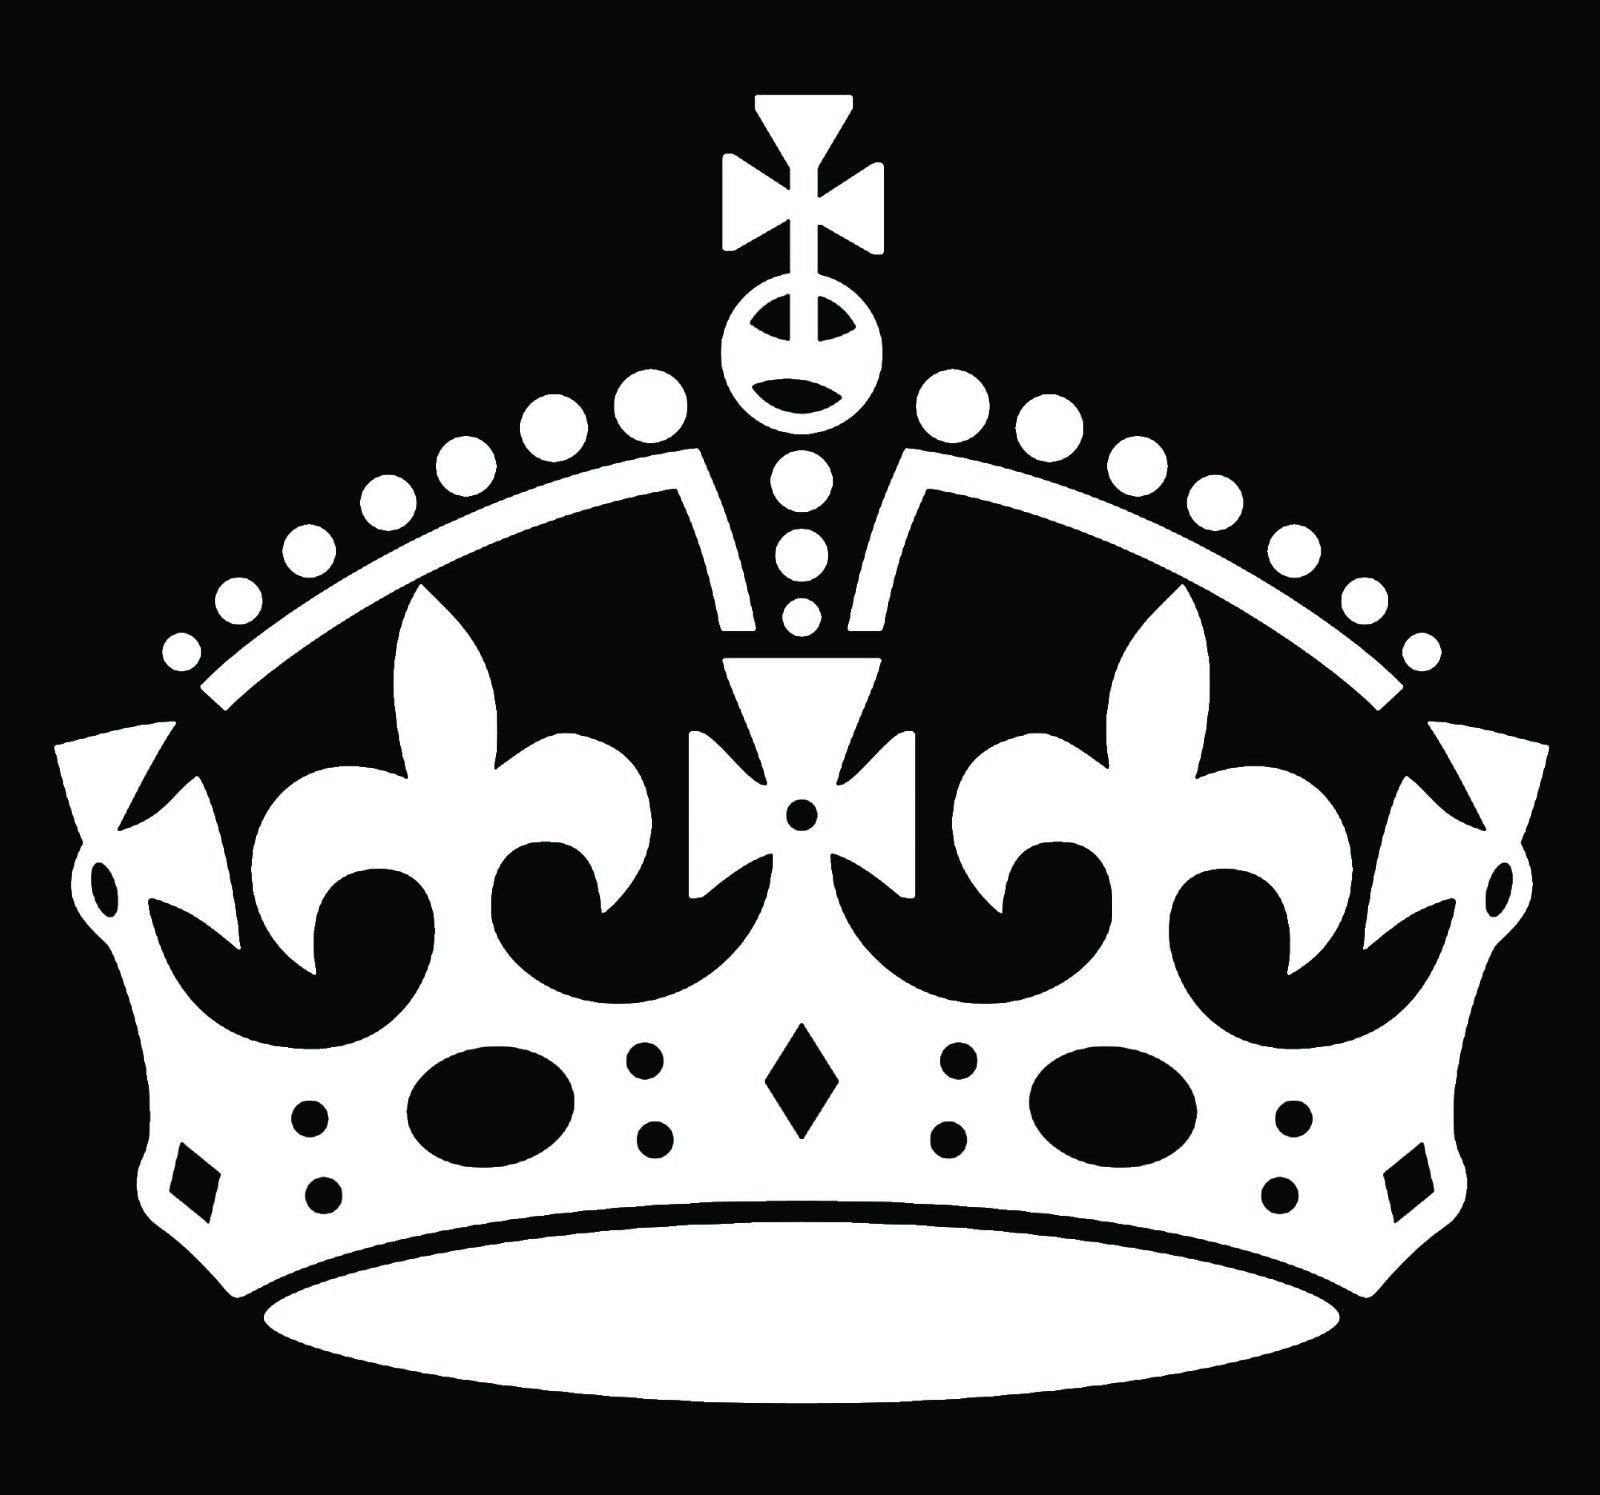 Displaying Keep Calm And Carry On Crown Vector Image | imagebasket.net